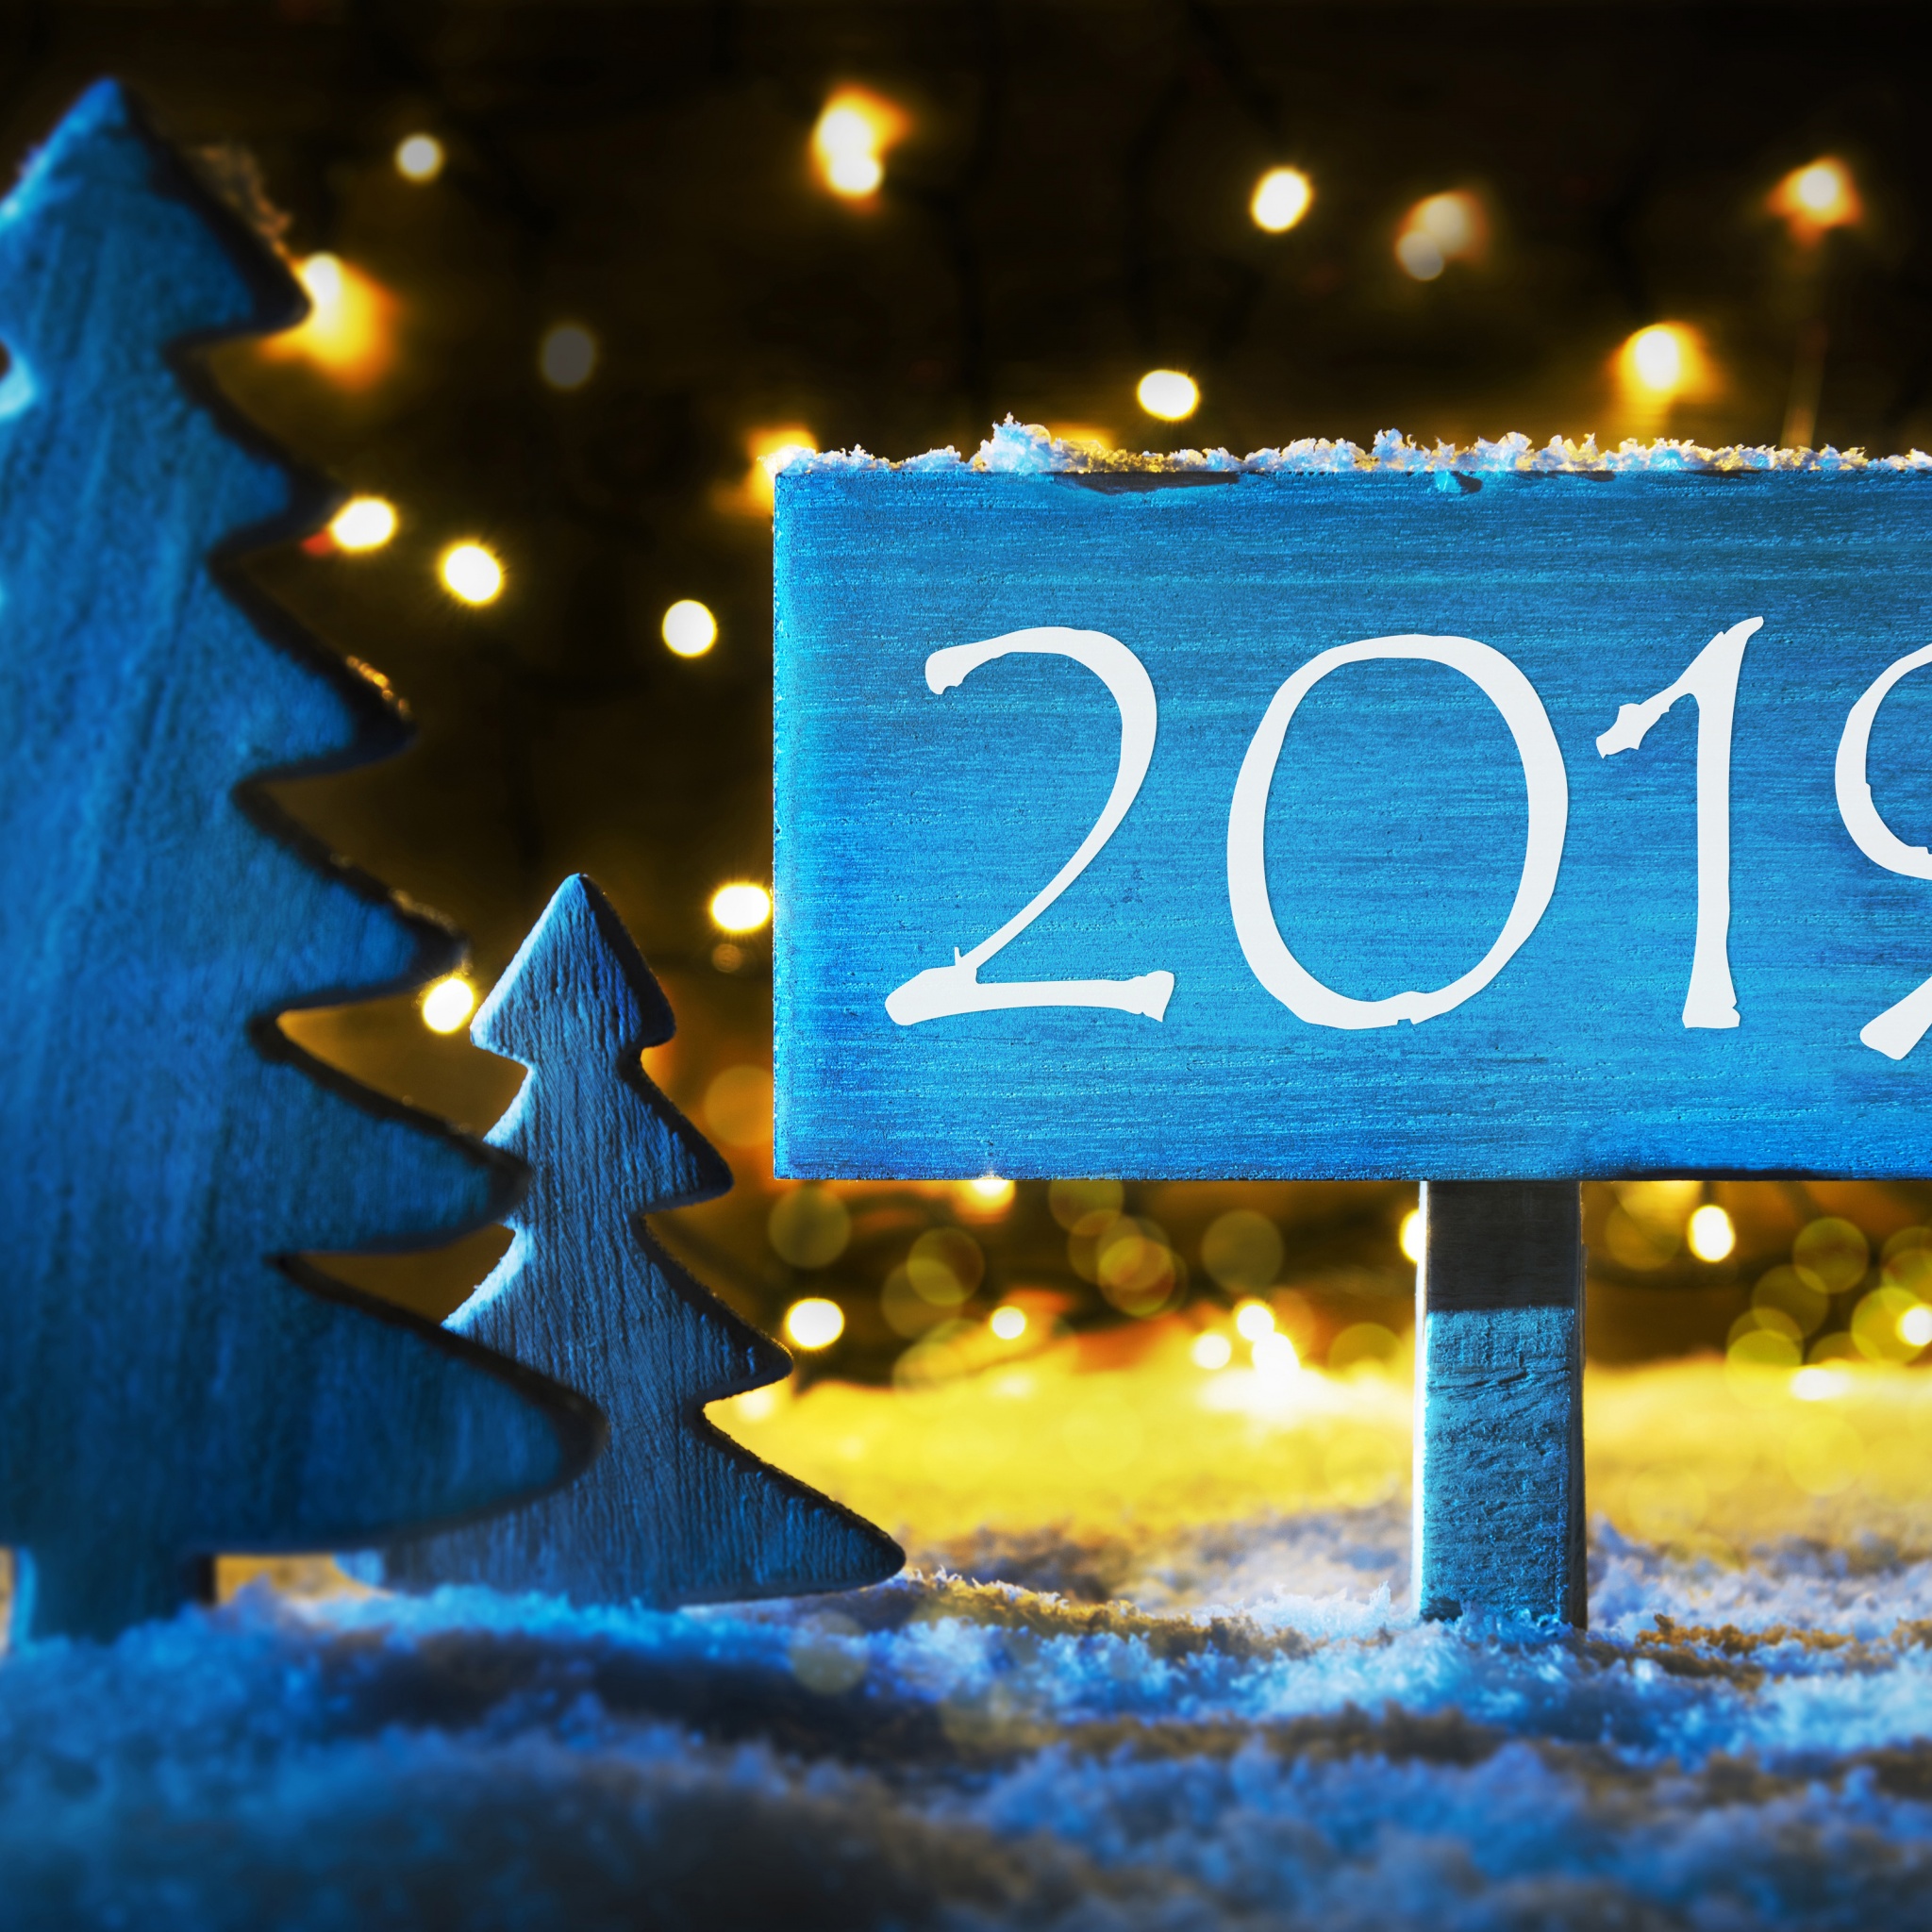 Fir Tree And Sign To 2019 New Year